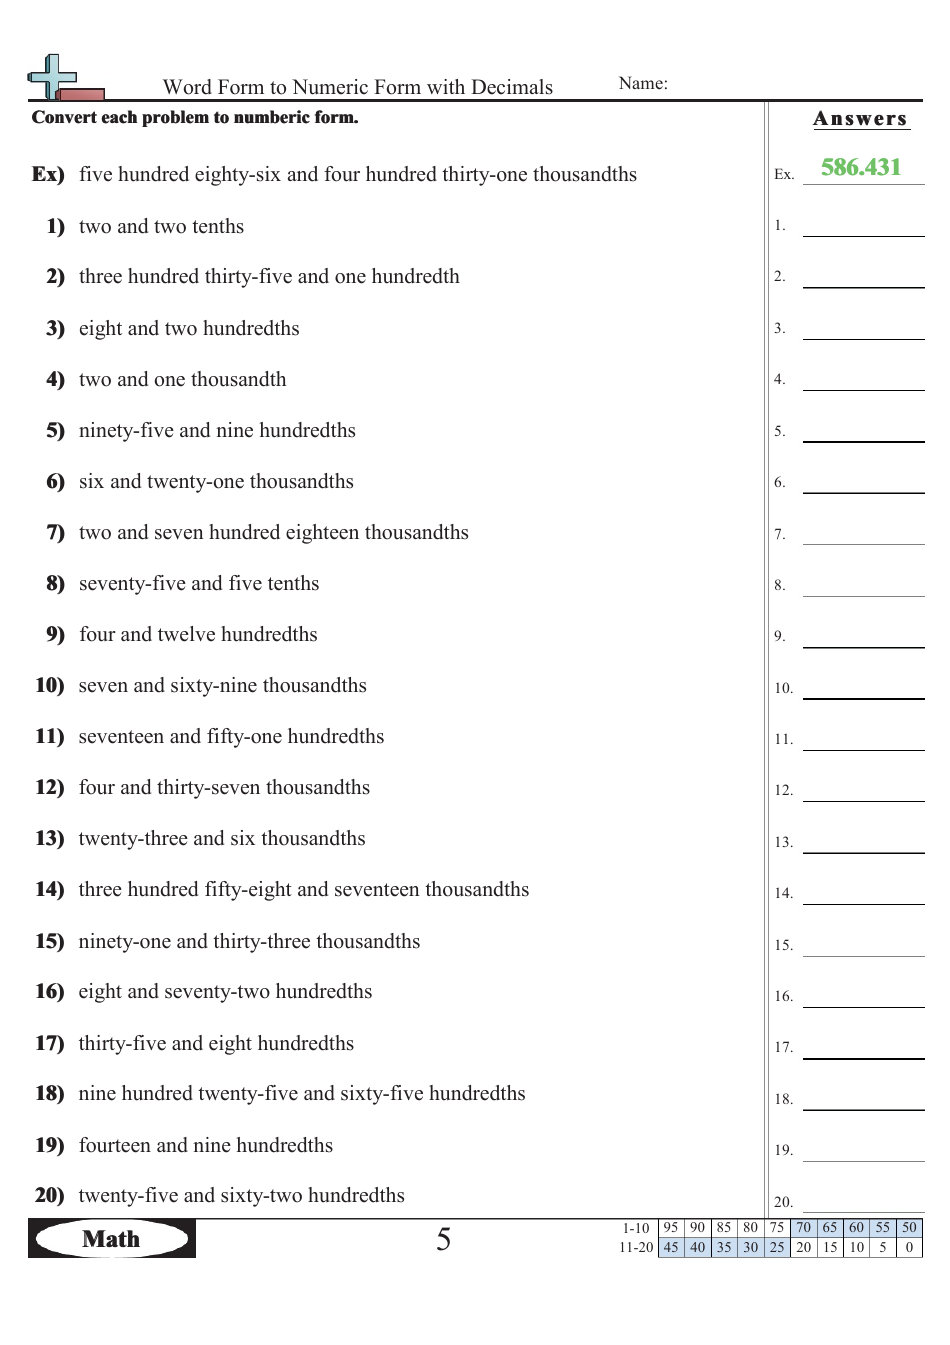 Word Form to Numeric Form With Decimals Worksheet With Answers - 586.431, Page 1